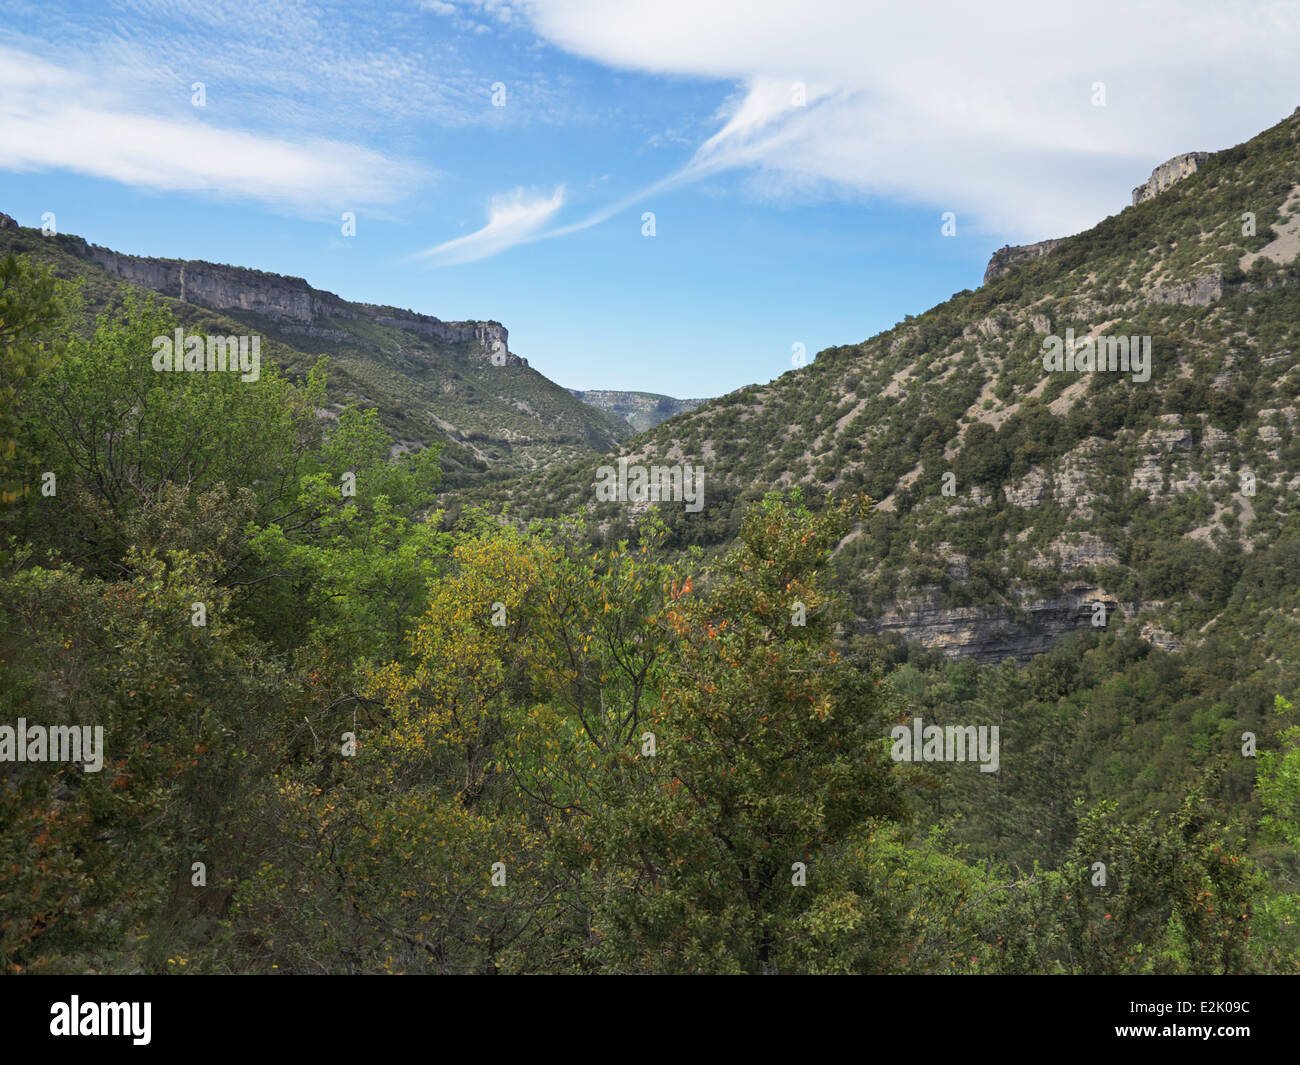 View of the Gorges de la Vis, near Navacelles, Gard, Languedoc-Roussillon, France (this gorge features in the Ian McEwan novel Black Dogs) Stock Photo